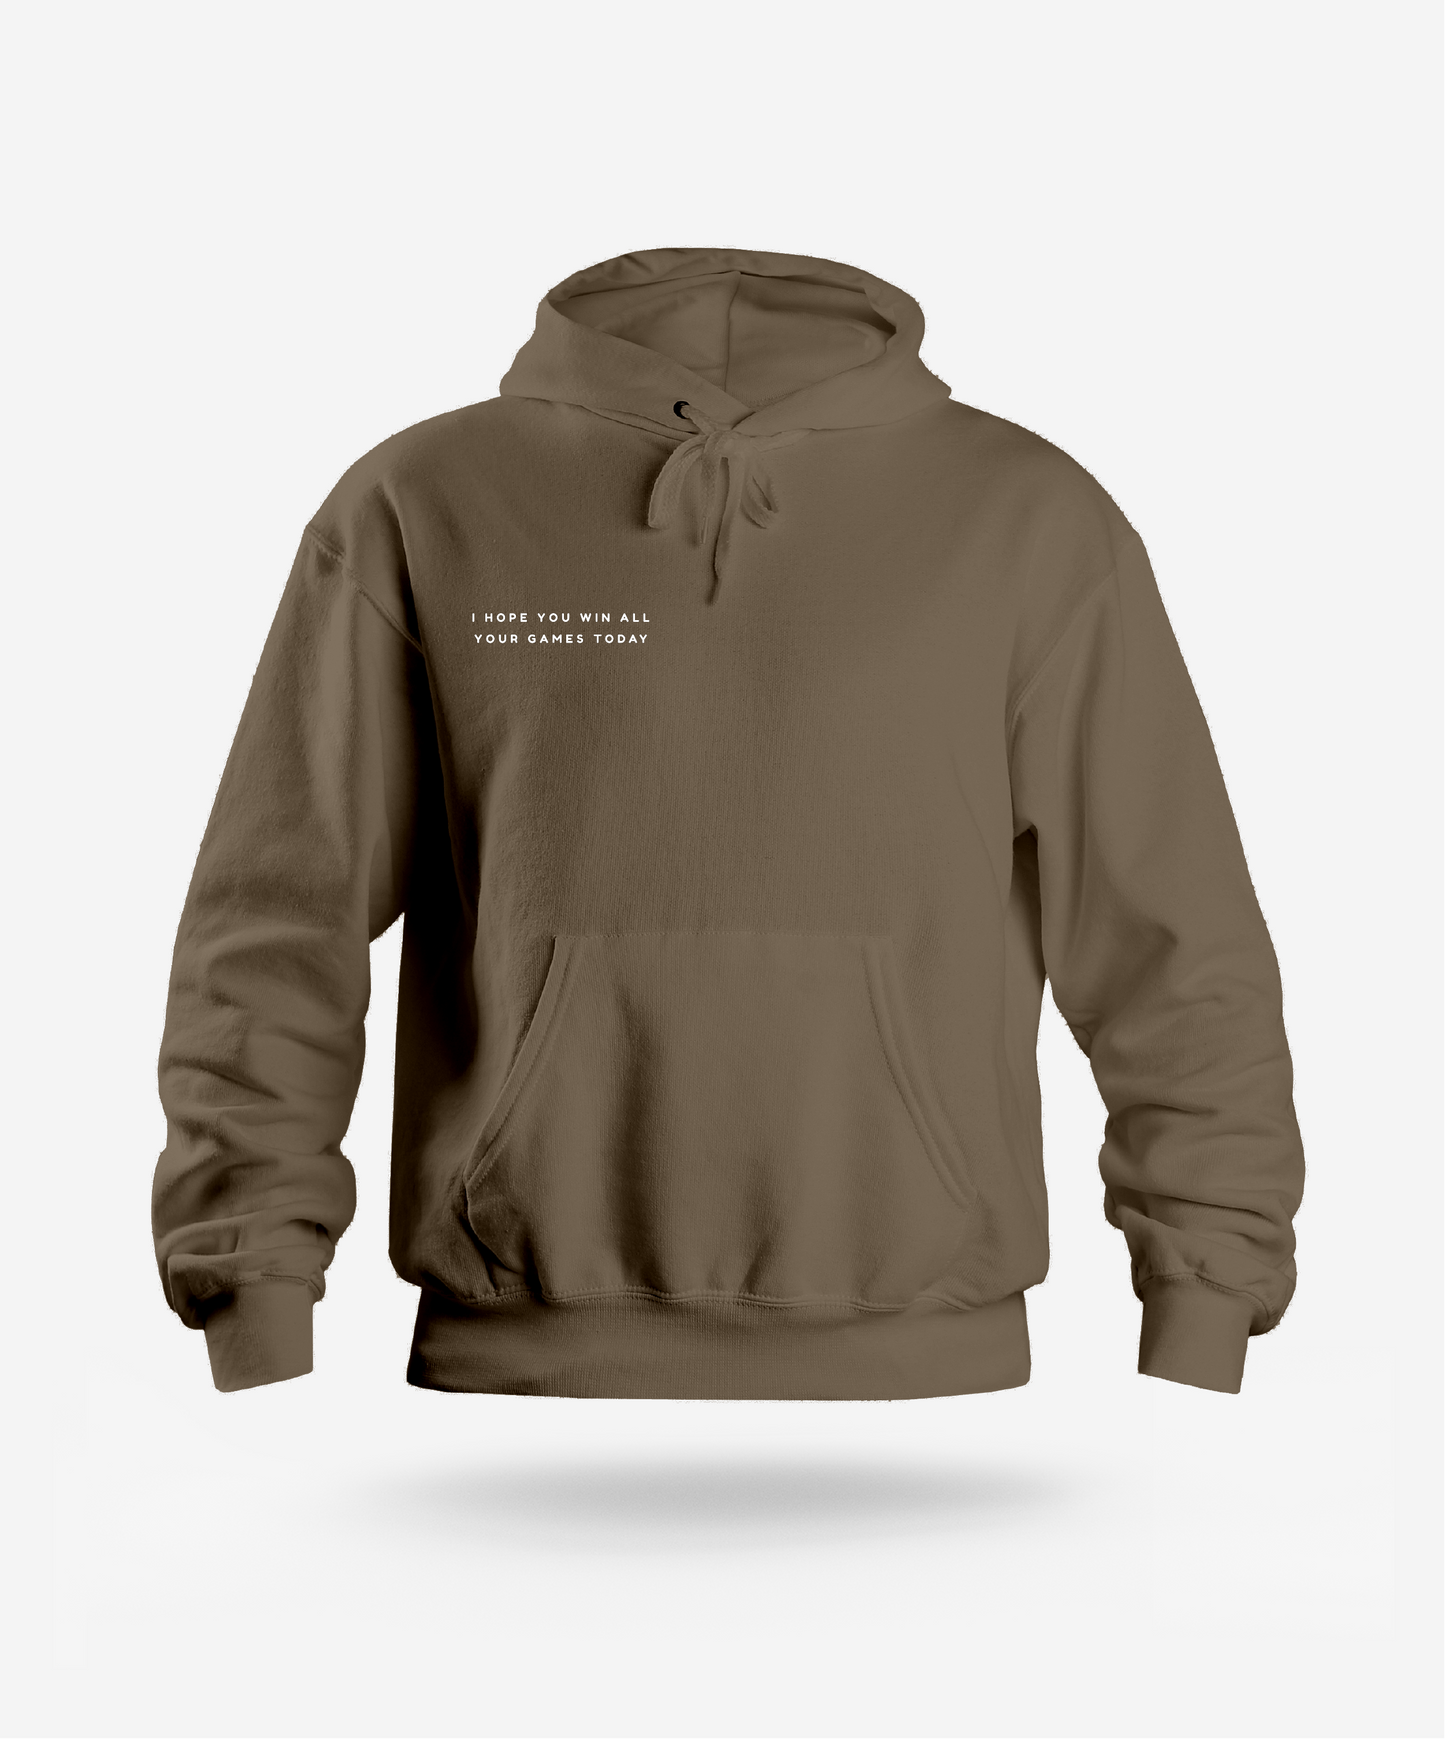 "I Hope You Win All Your Games Today" Hoodie